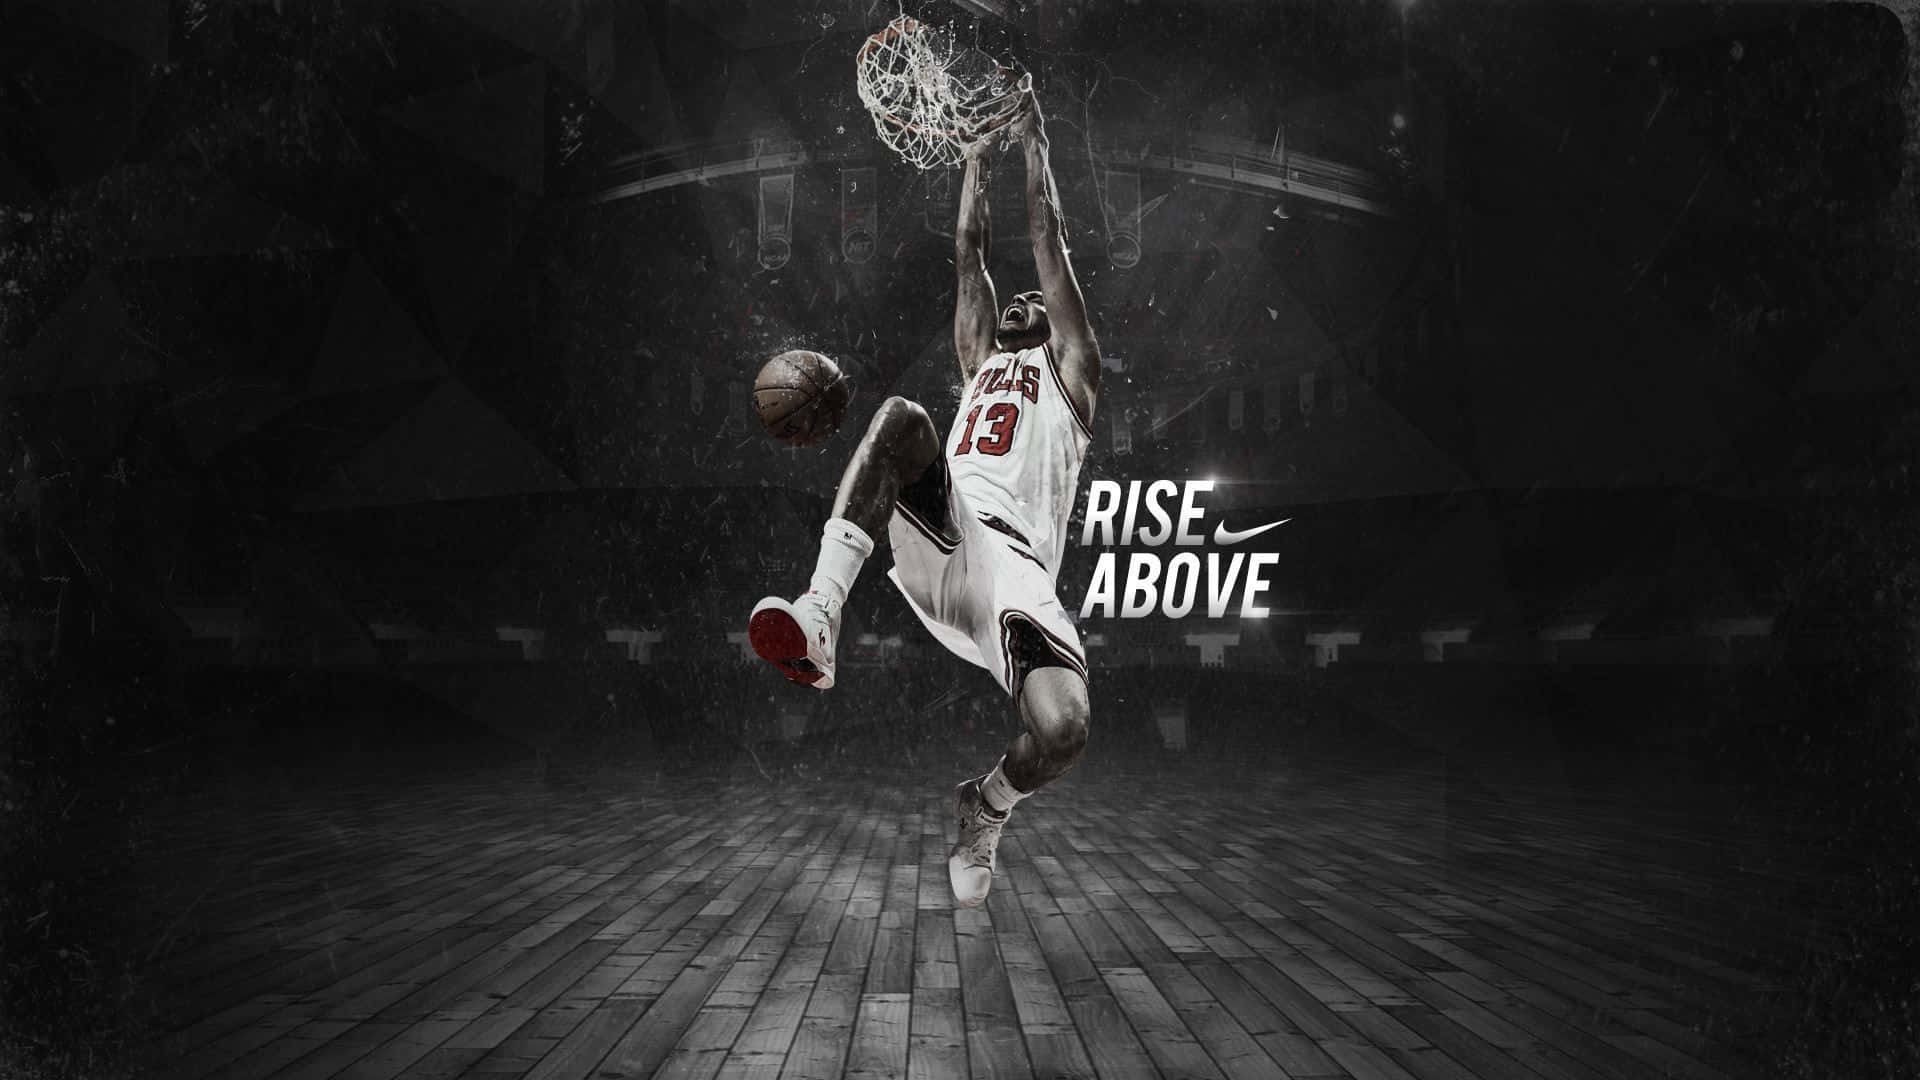 Nike Rise Above Basketball Poster Background